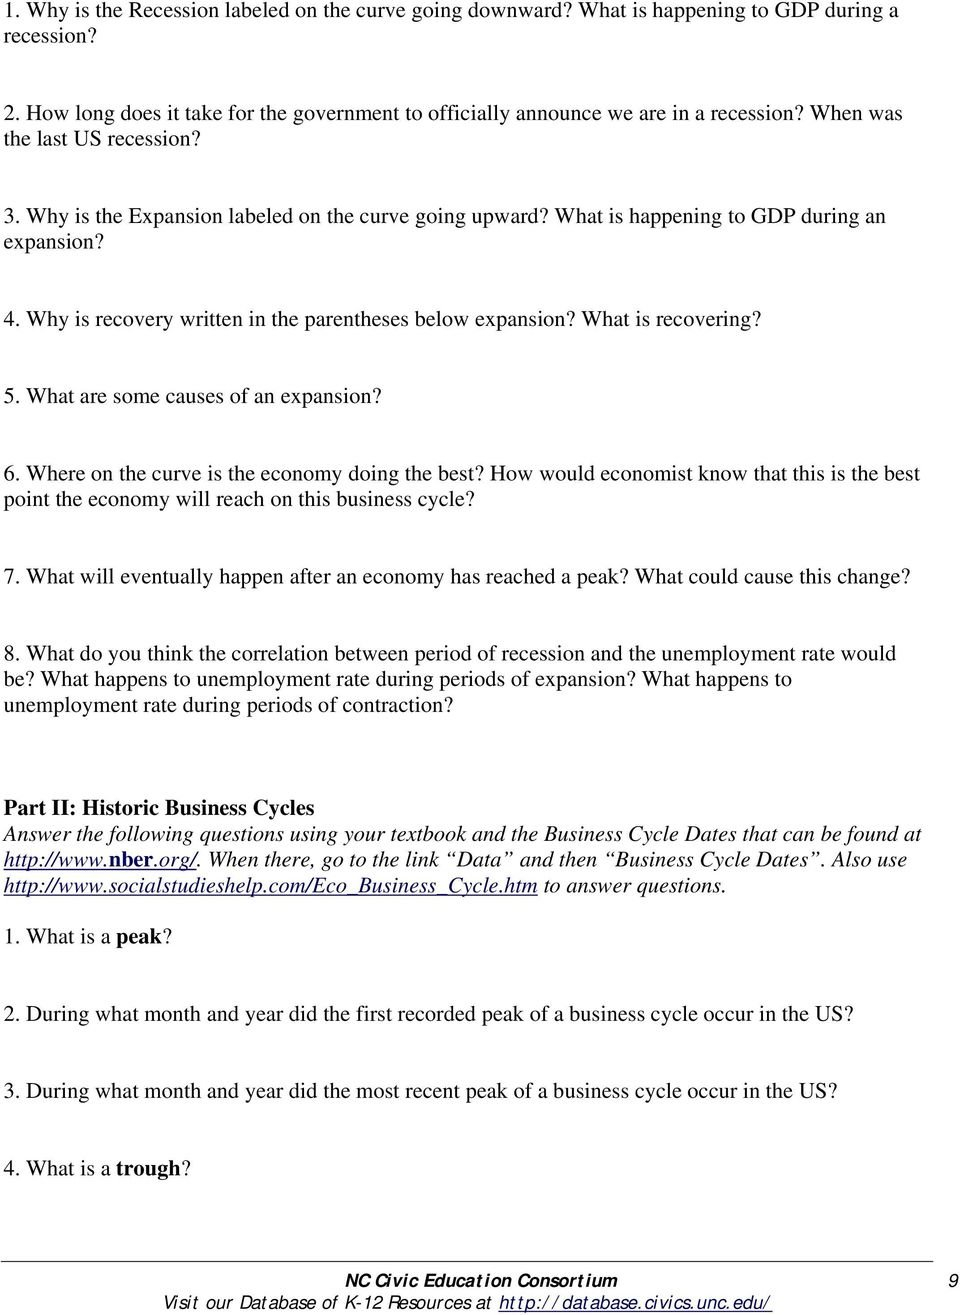 The Business Cycle And Important Economic Measures  Pdf Along With One Us Business Cycle Worksheet Answer Key